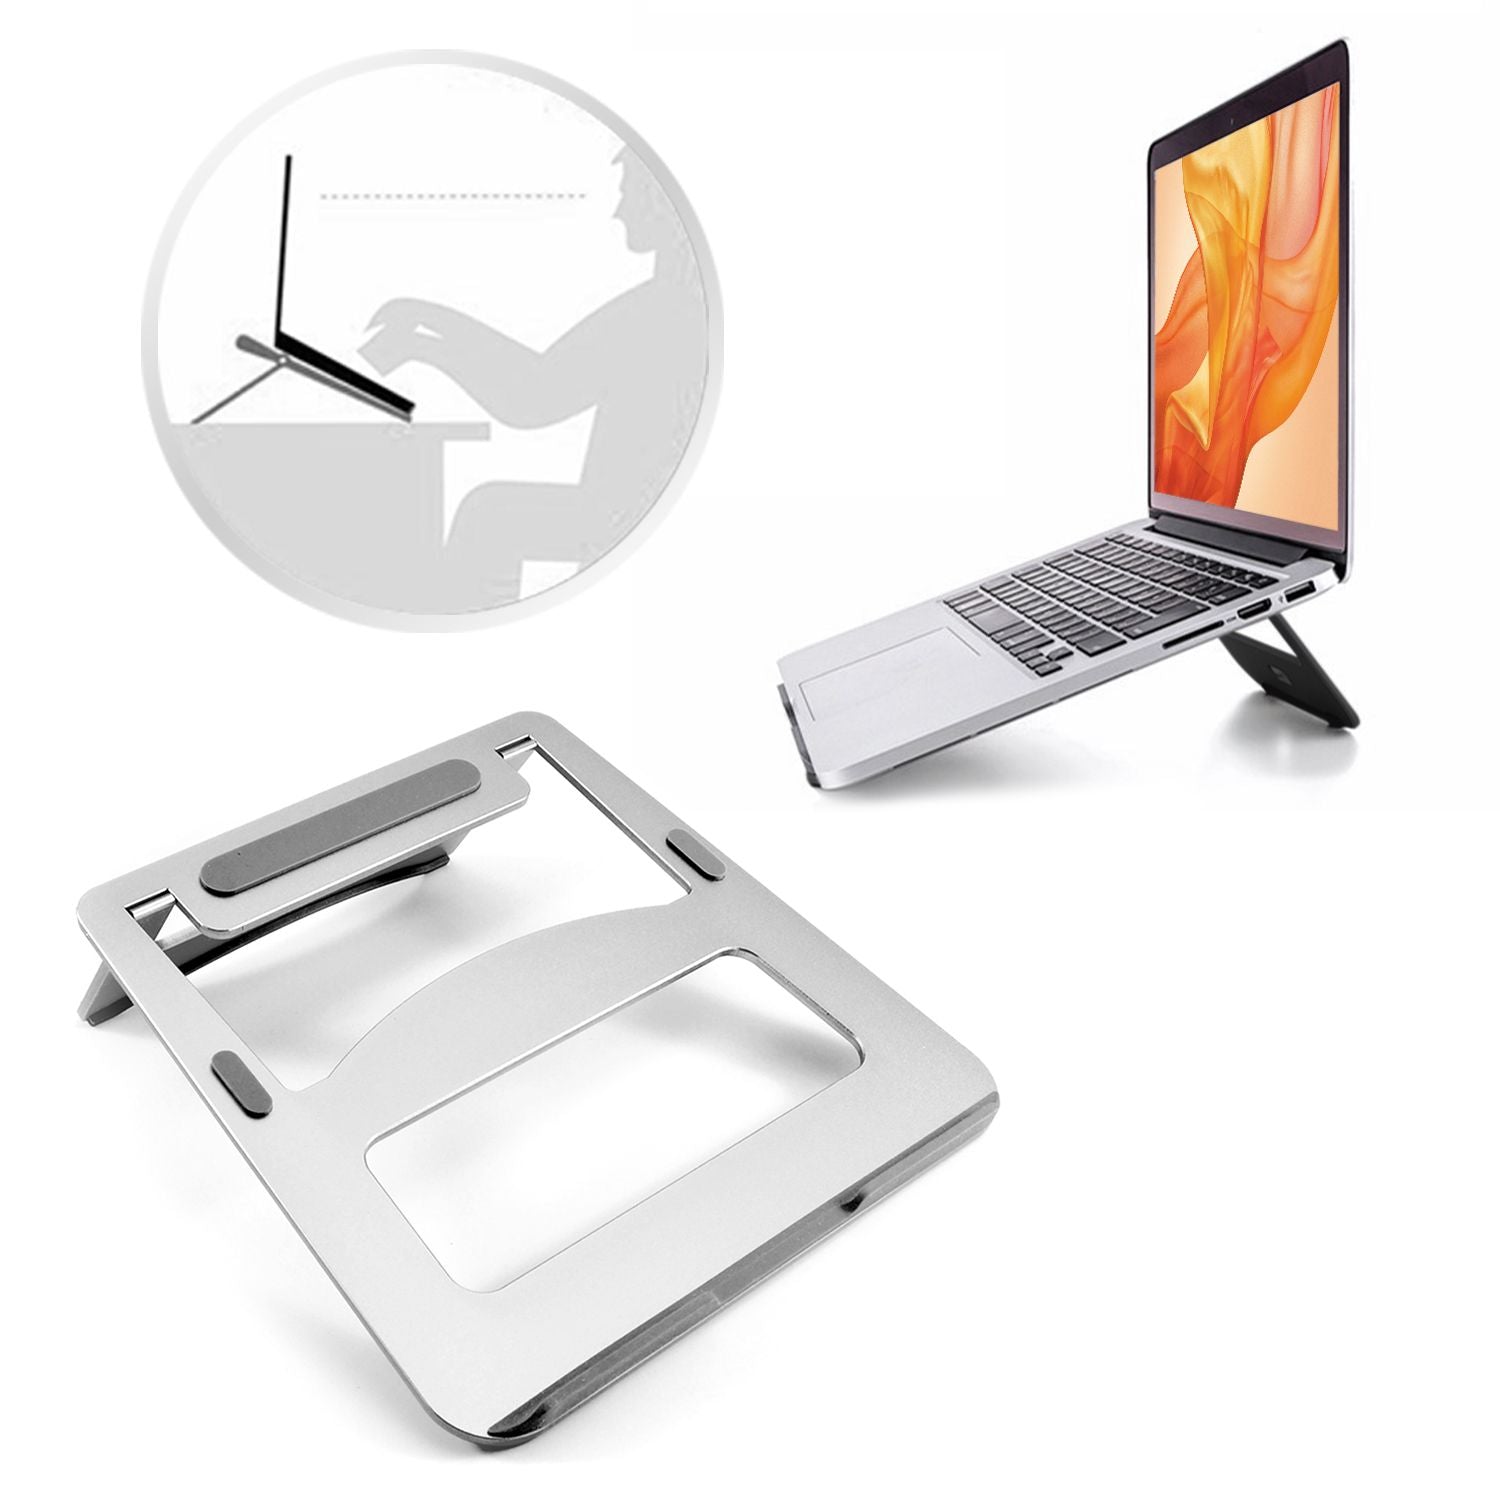 Aluminium laptop riser with and without laptop. 